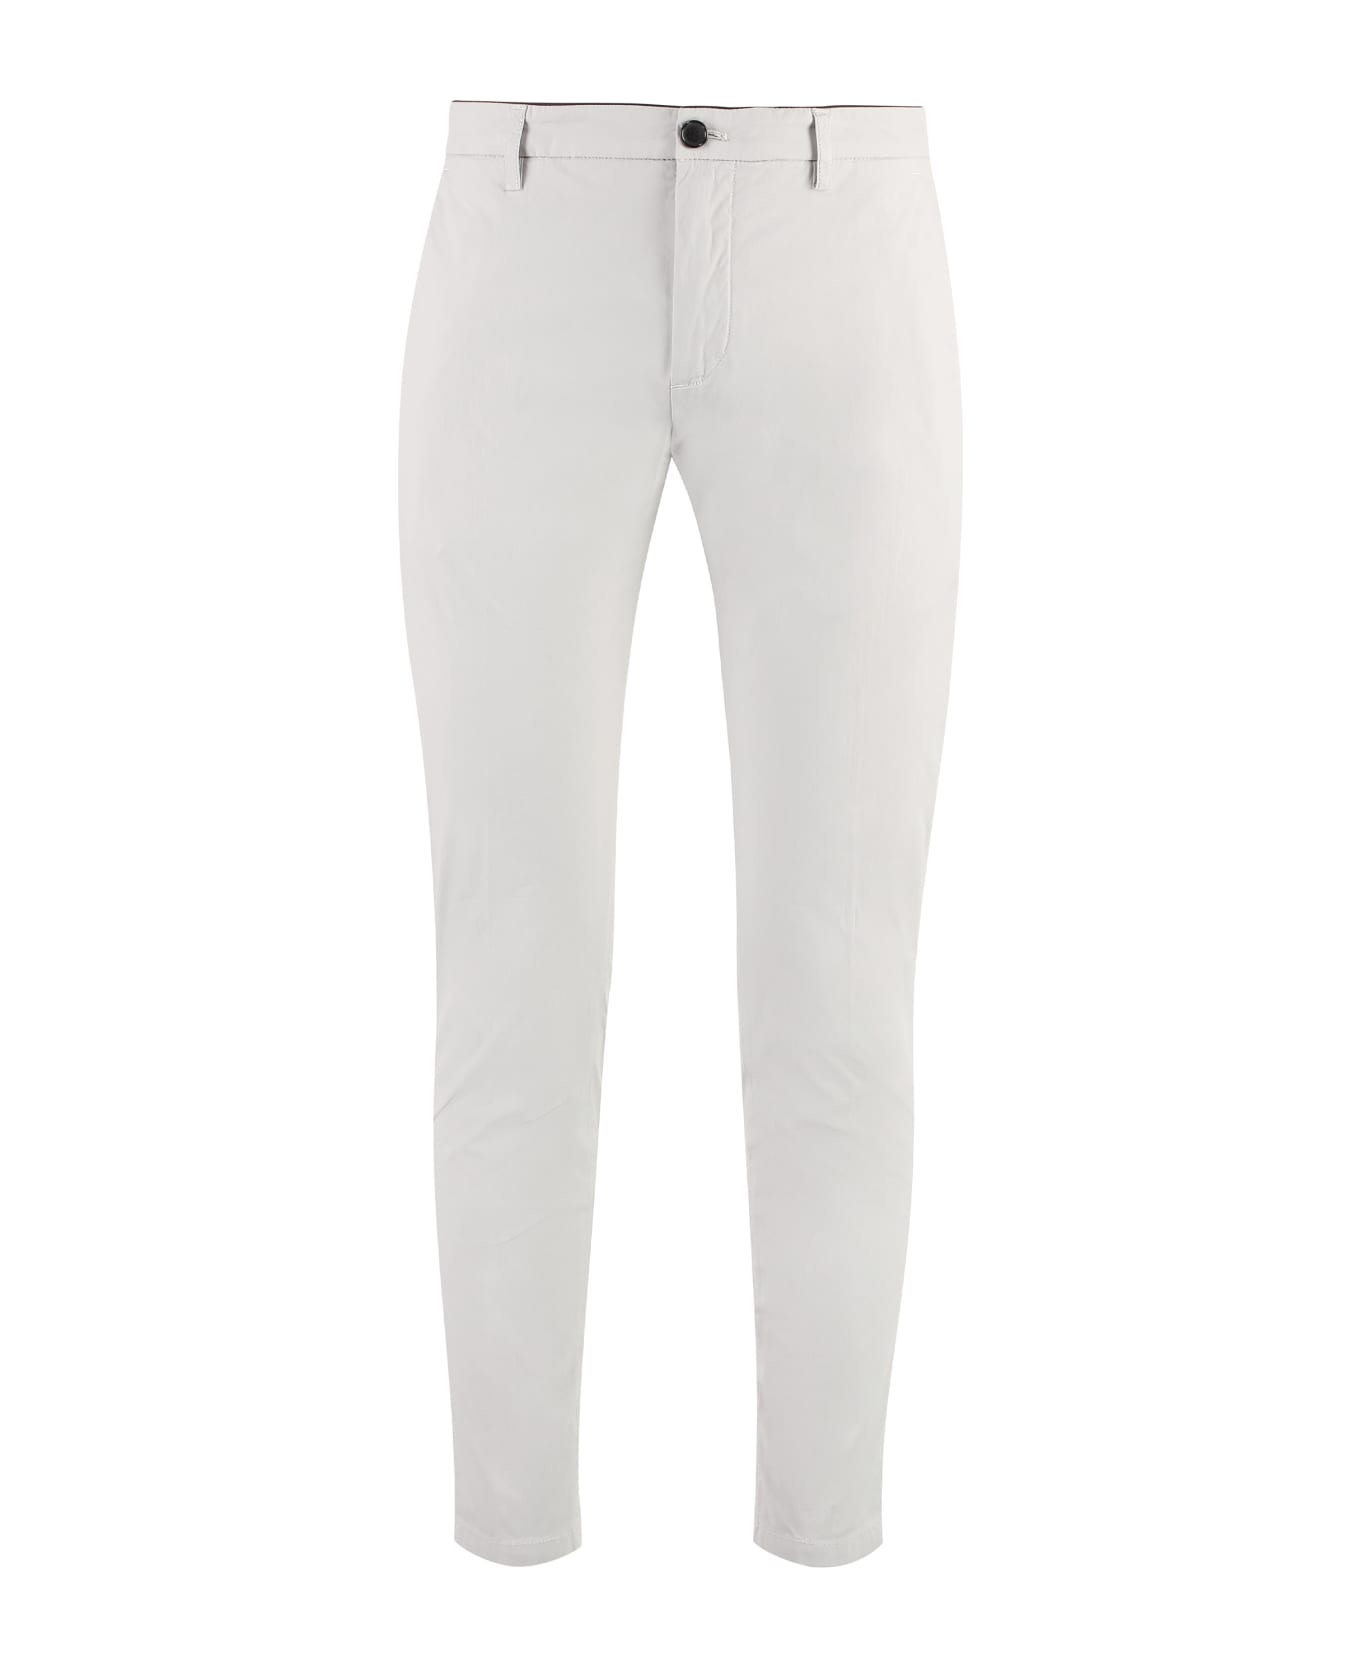 Department Five Prince Chino Trousers - grey